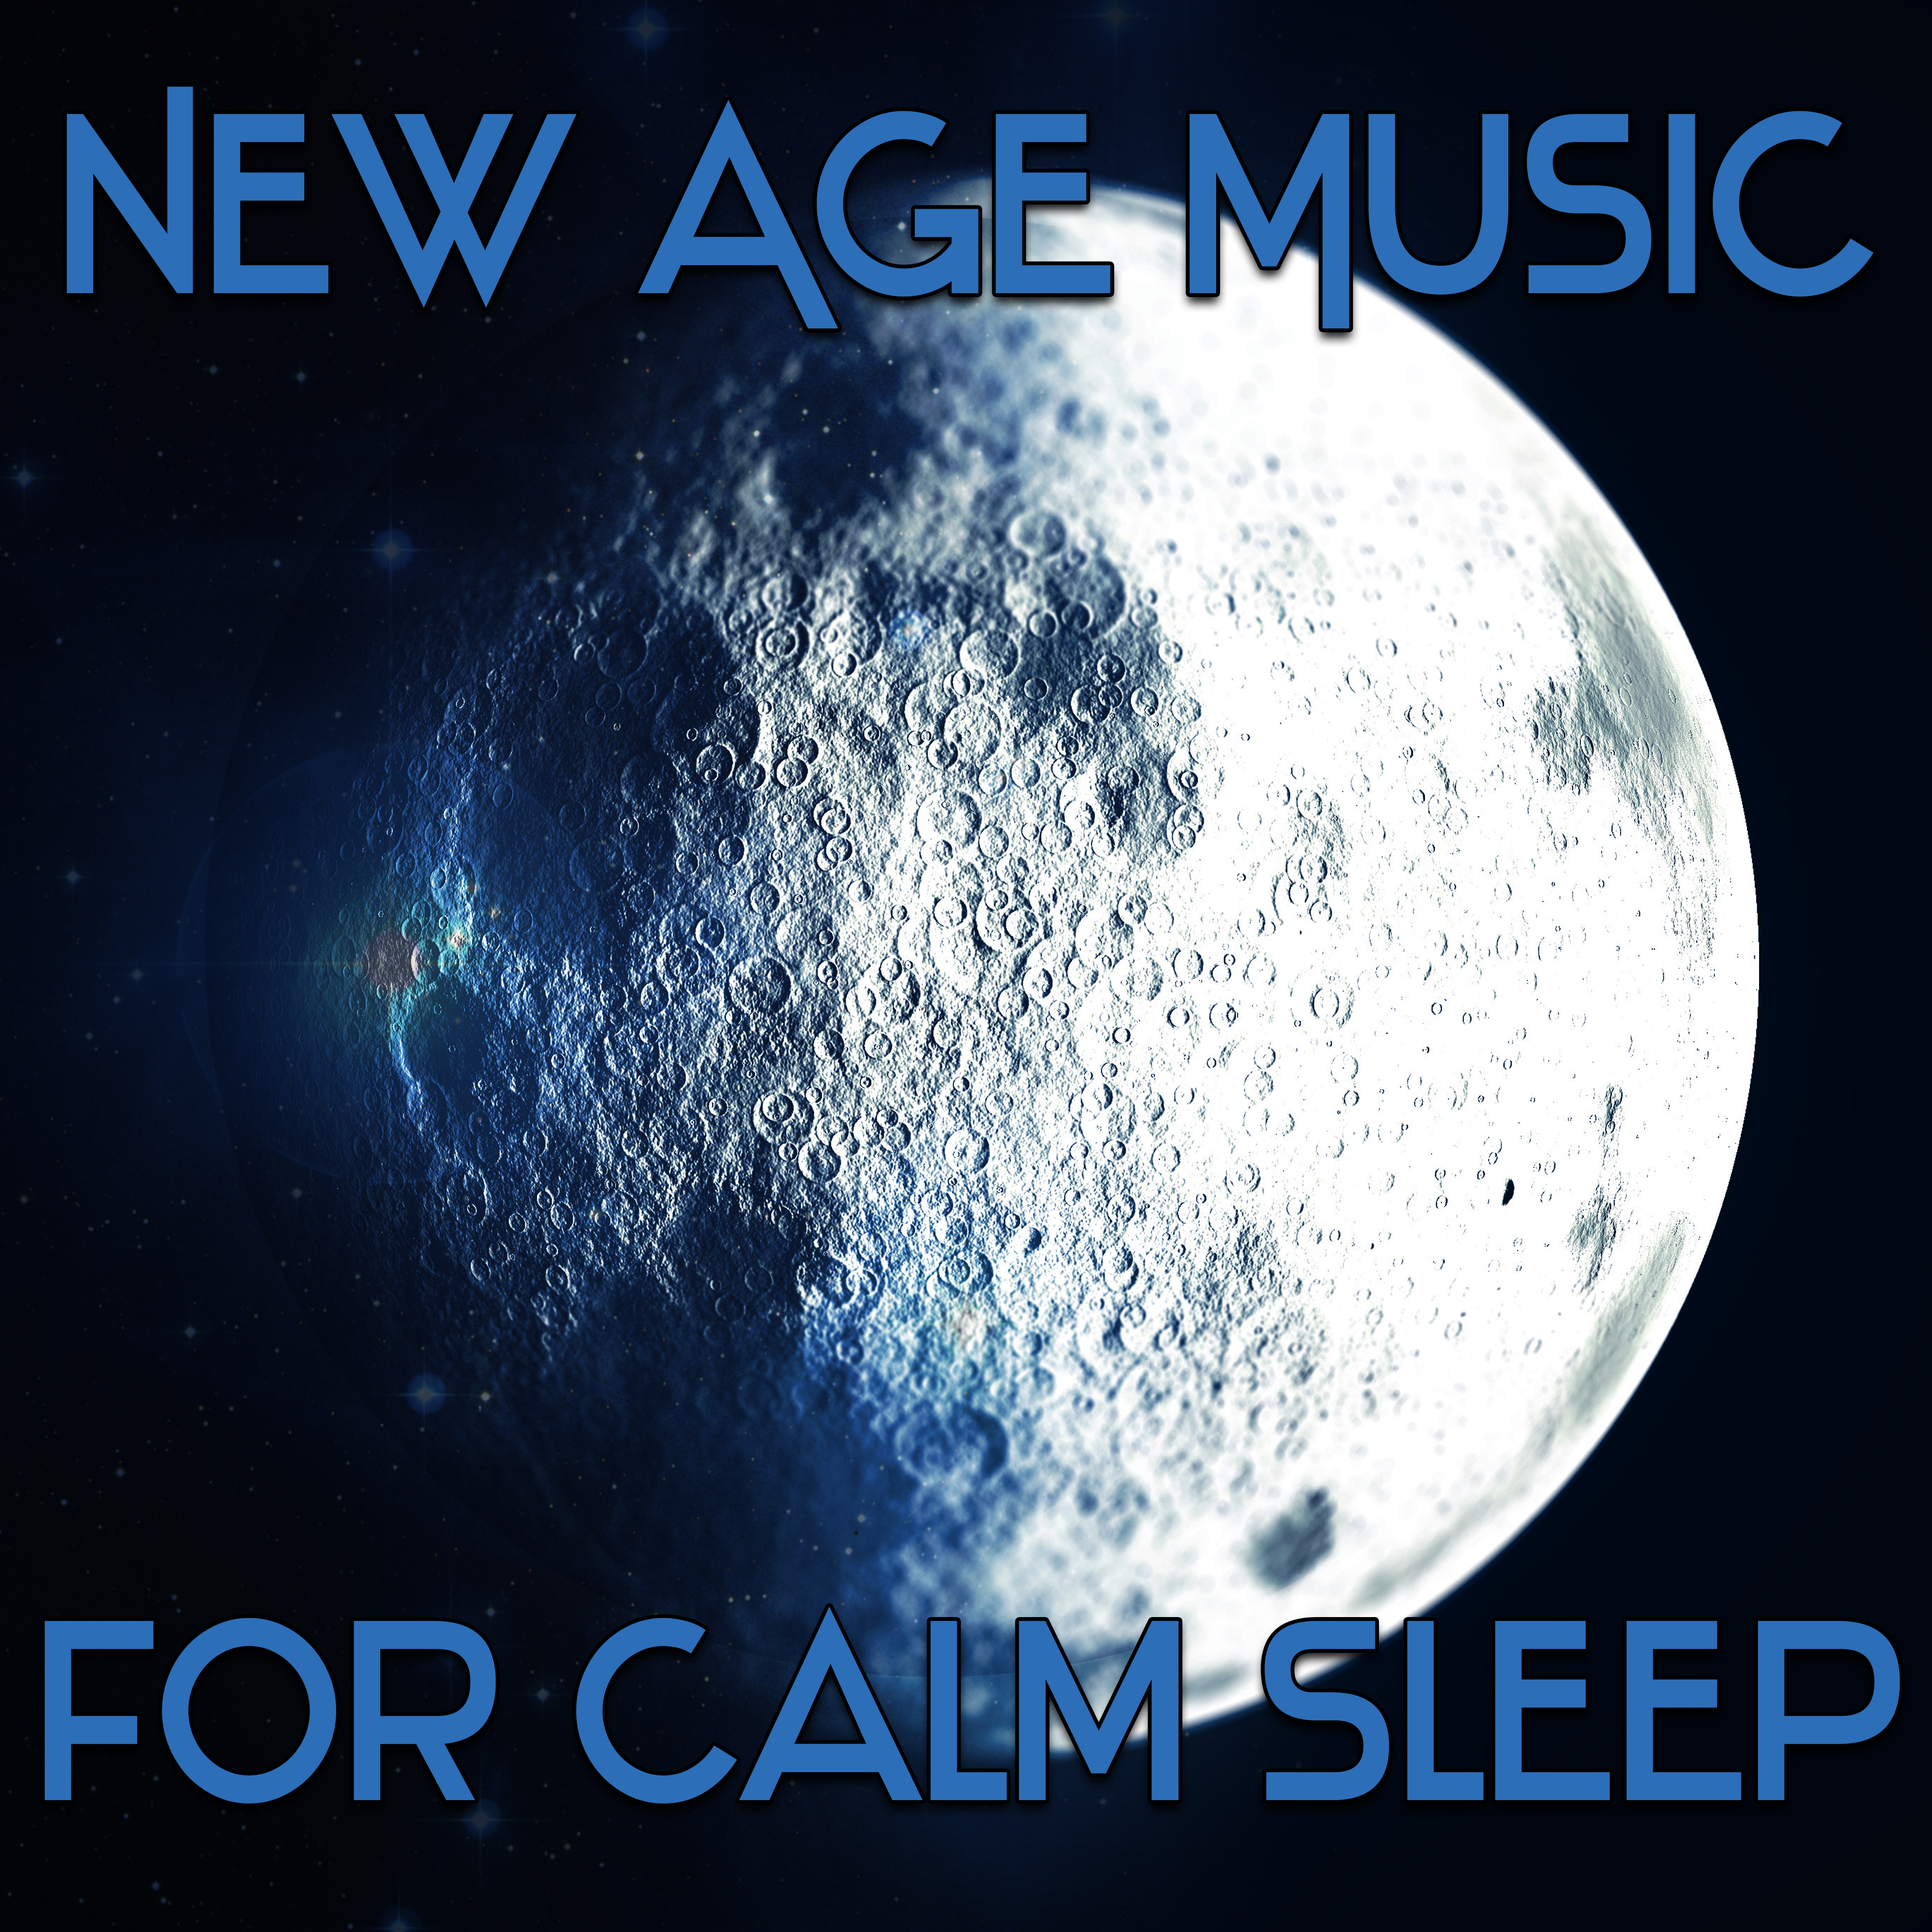 New Age Music for Calm Sleep – Sleeping Hours, Sweet Dreams, Night Relaxation, Rest with New Age Music